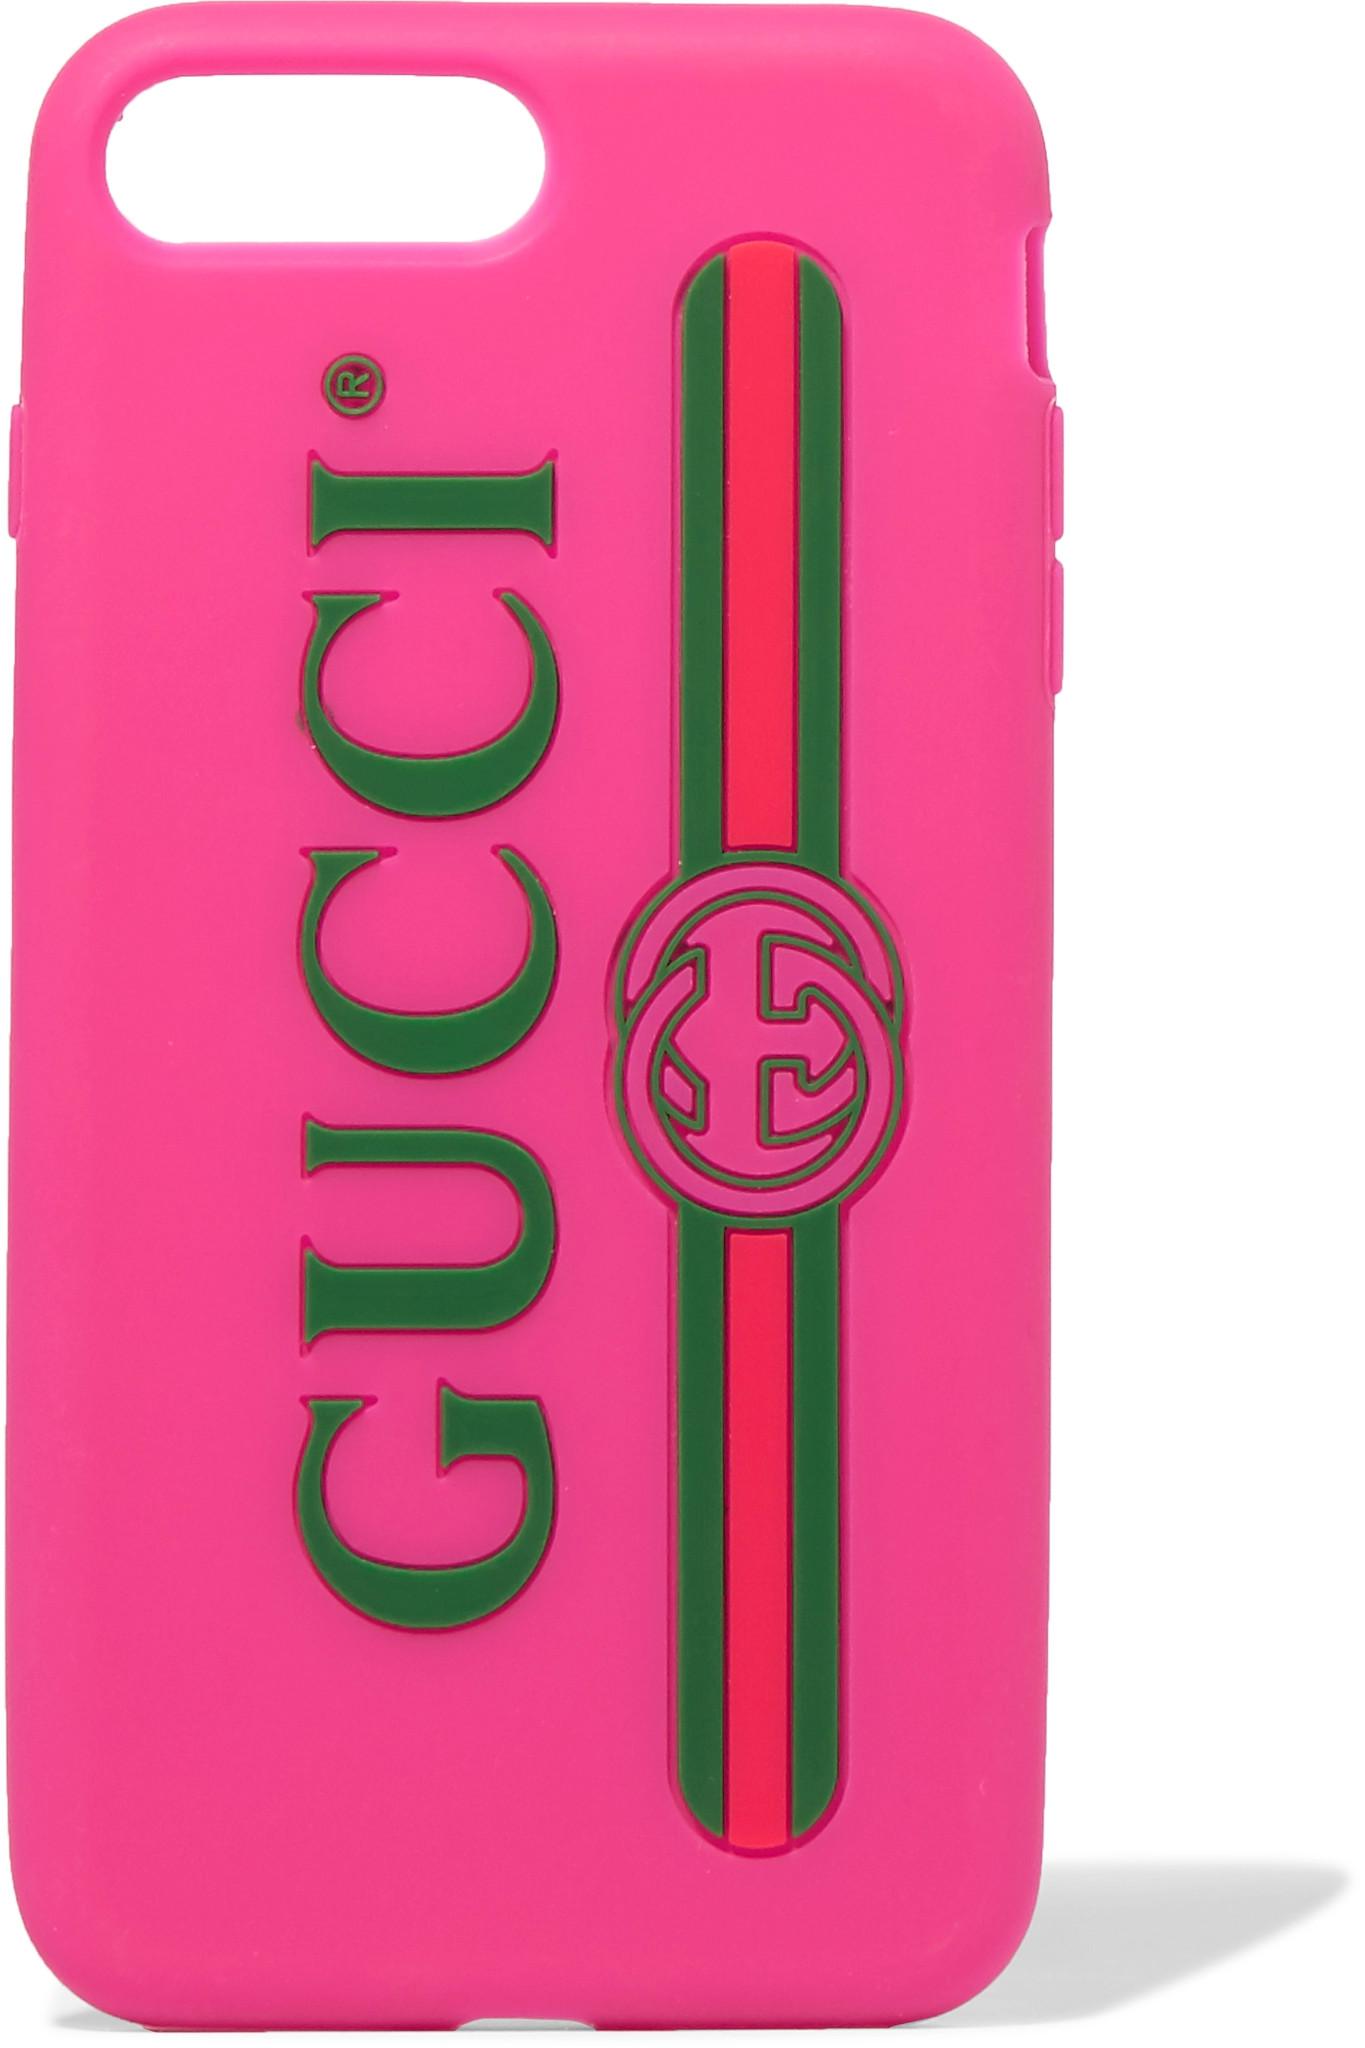 Gucci Logo Iphone 7 Case in Pink - Lyst